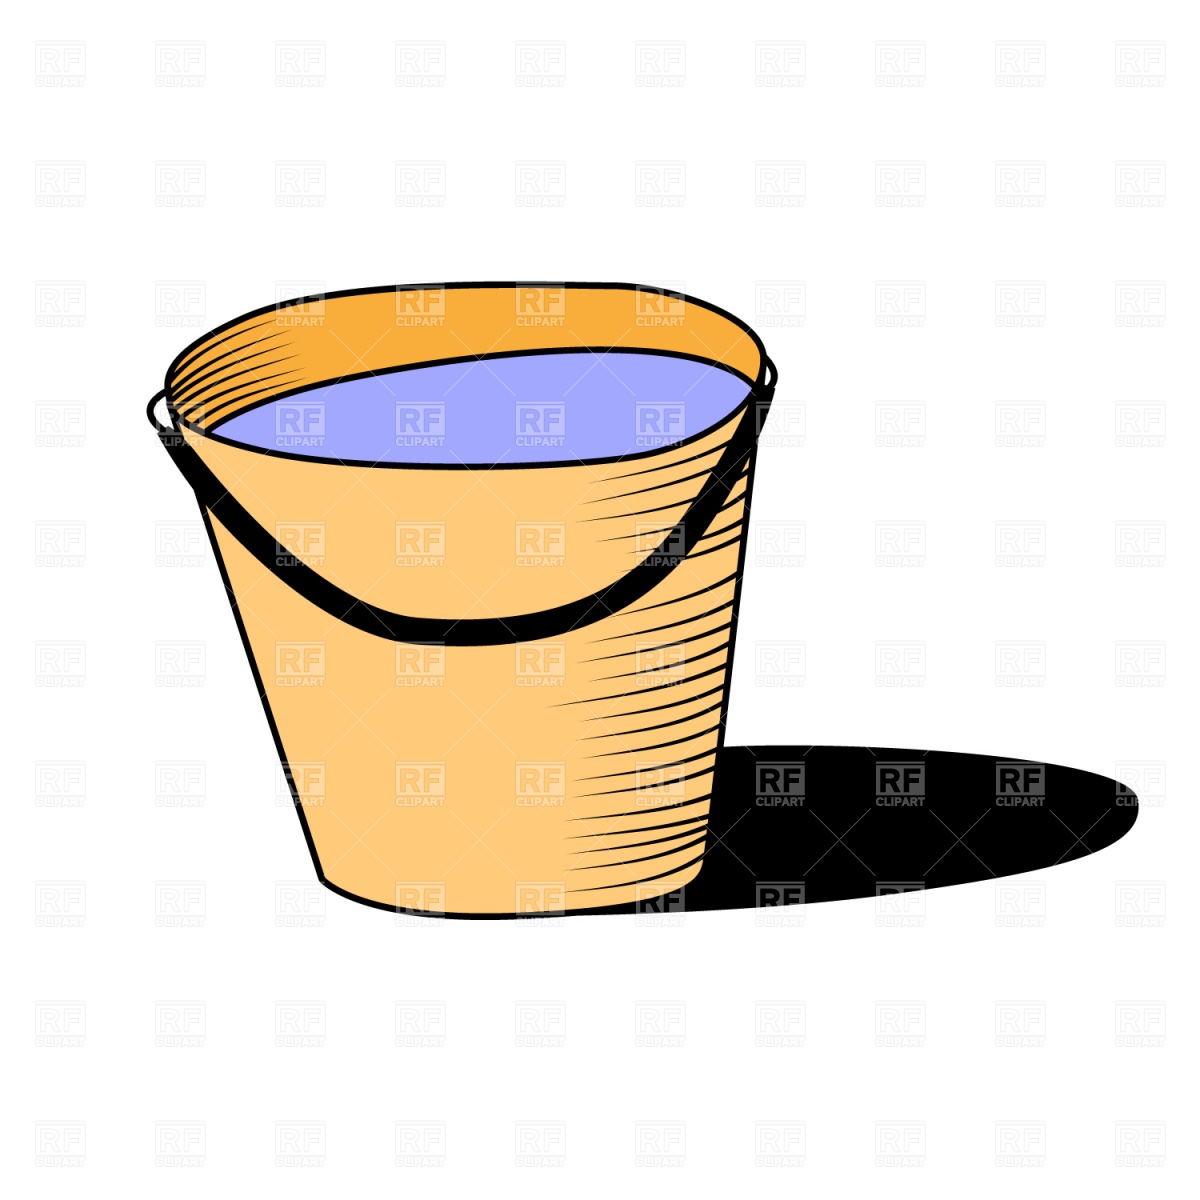 Bucket 1558 Objects Download Royalty Free Vector Clipart  Eps